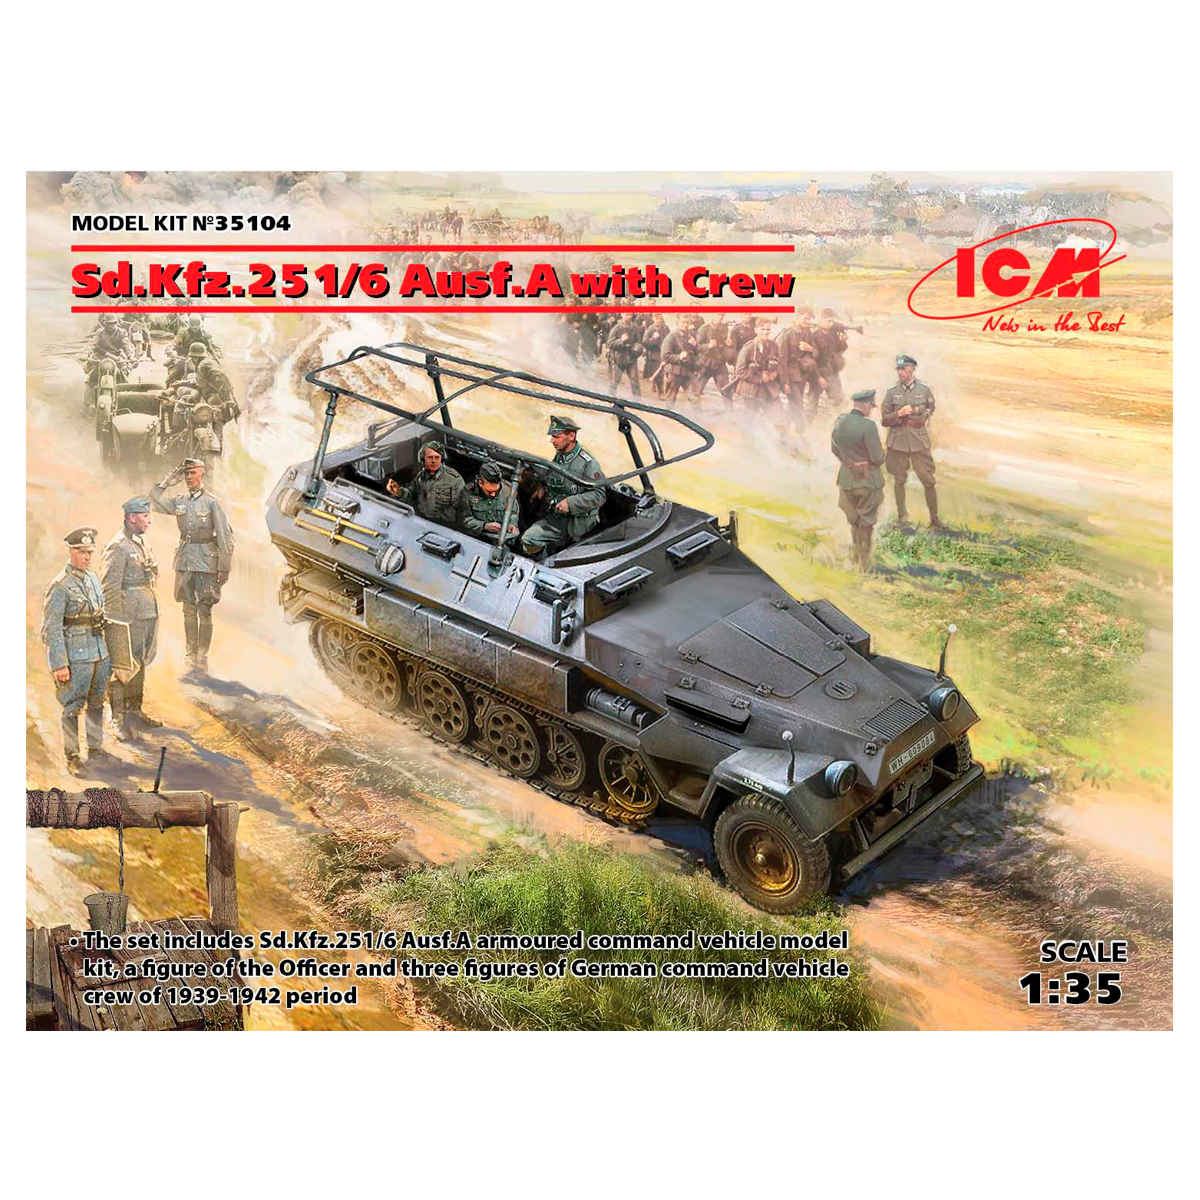 Sd.Kfz.251/6 Ausf.A with Crew 1/35